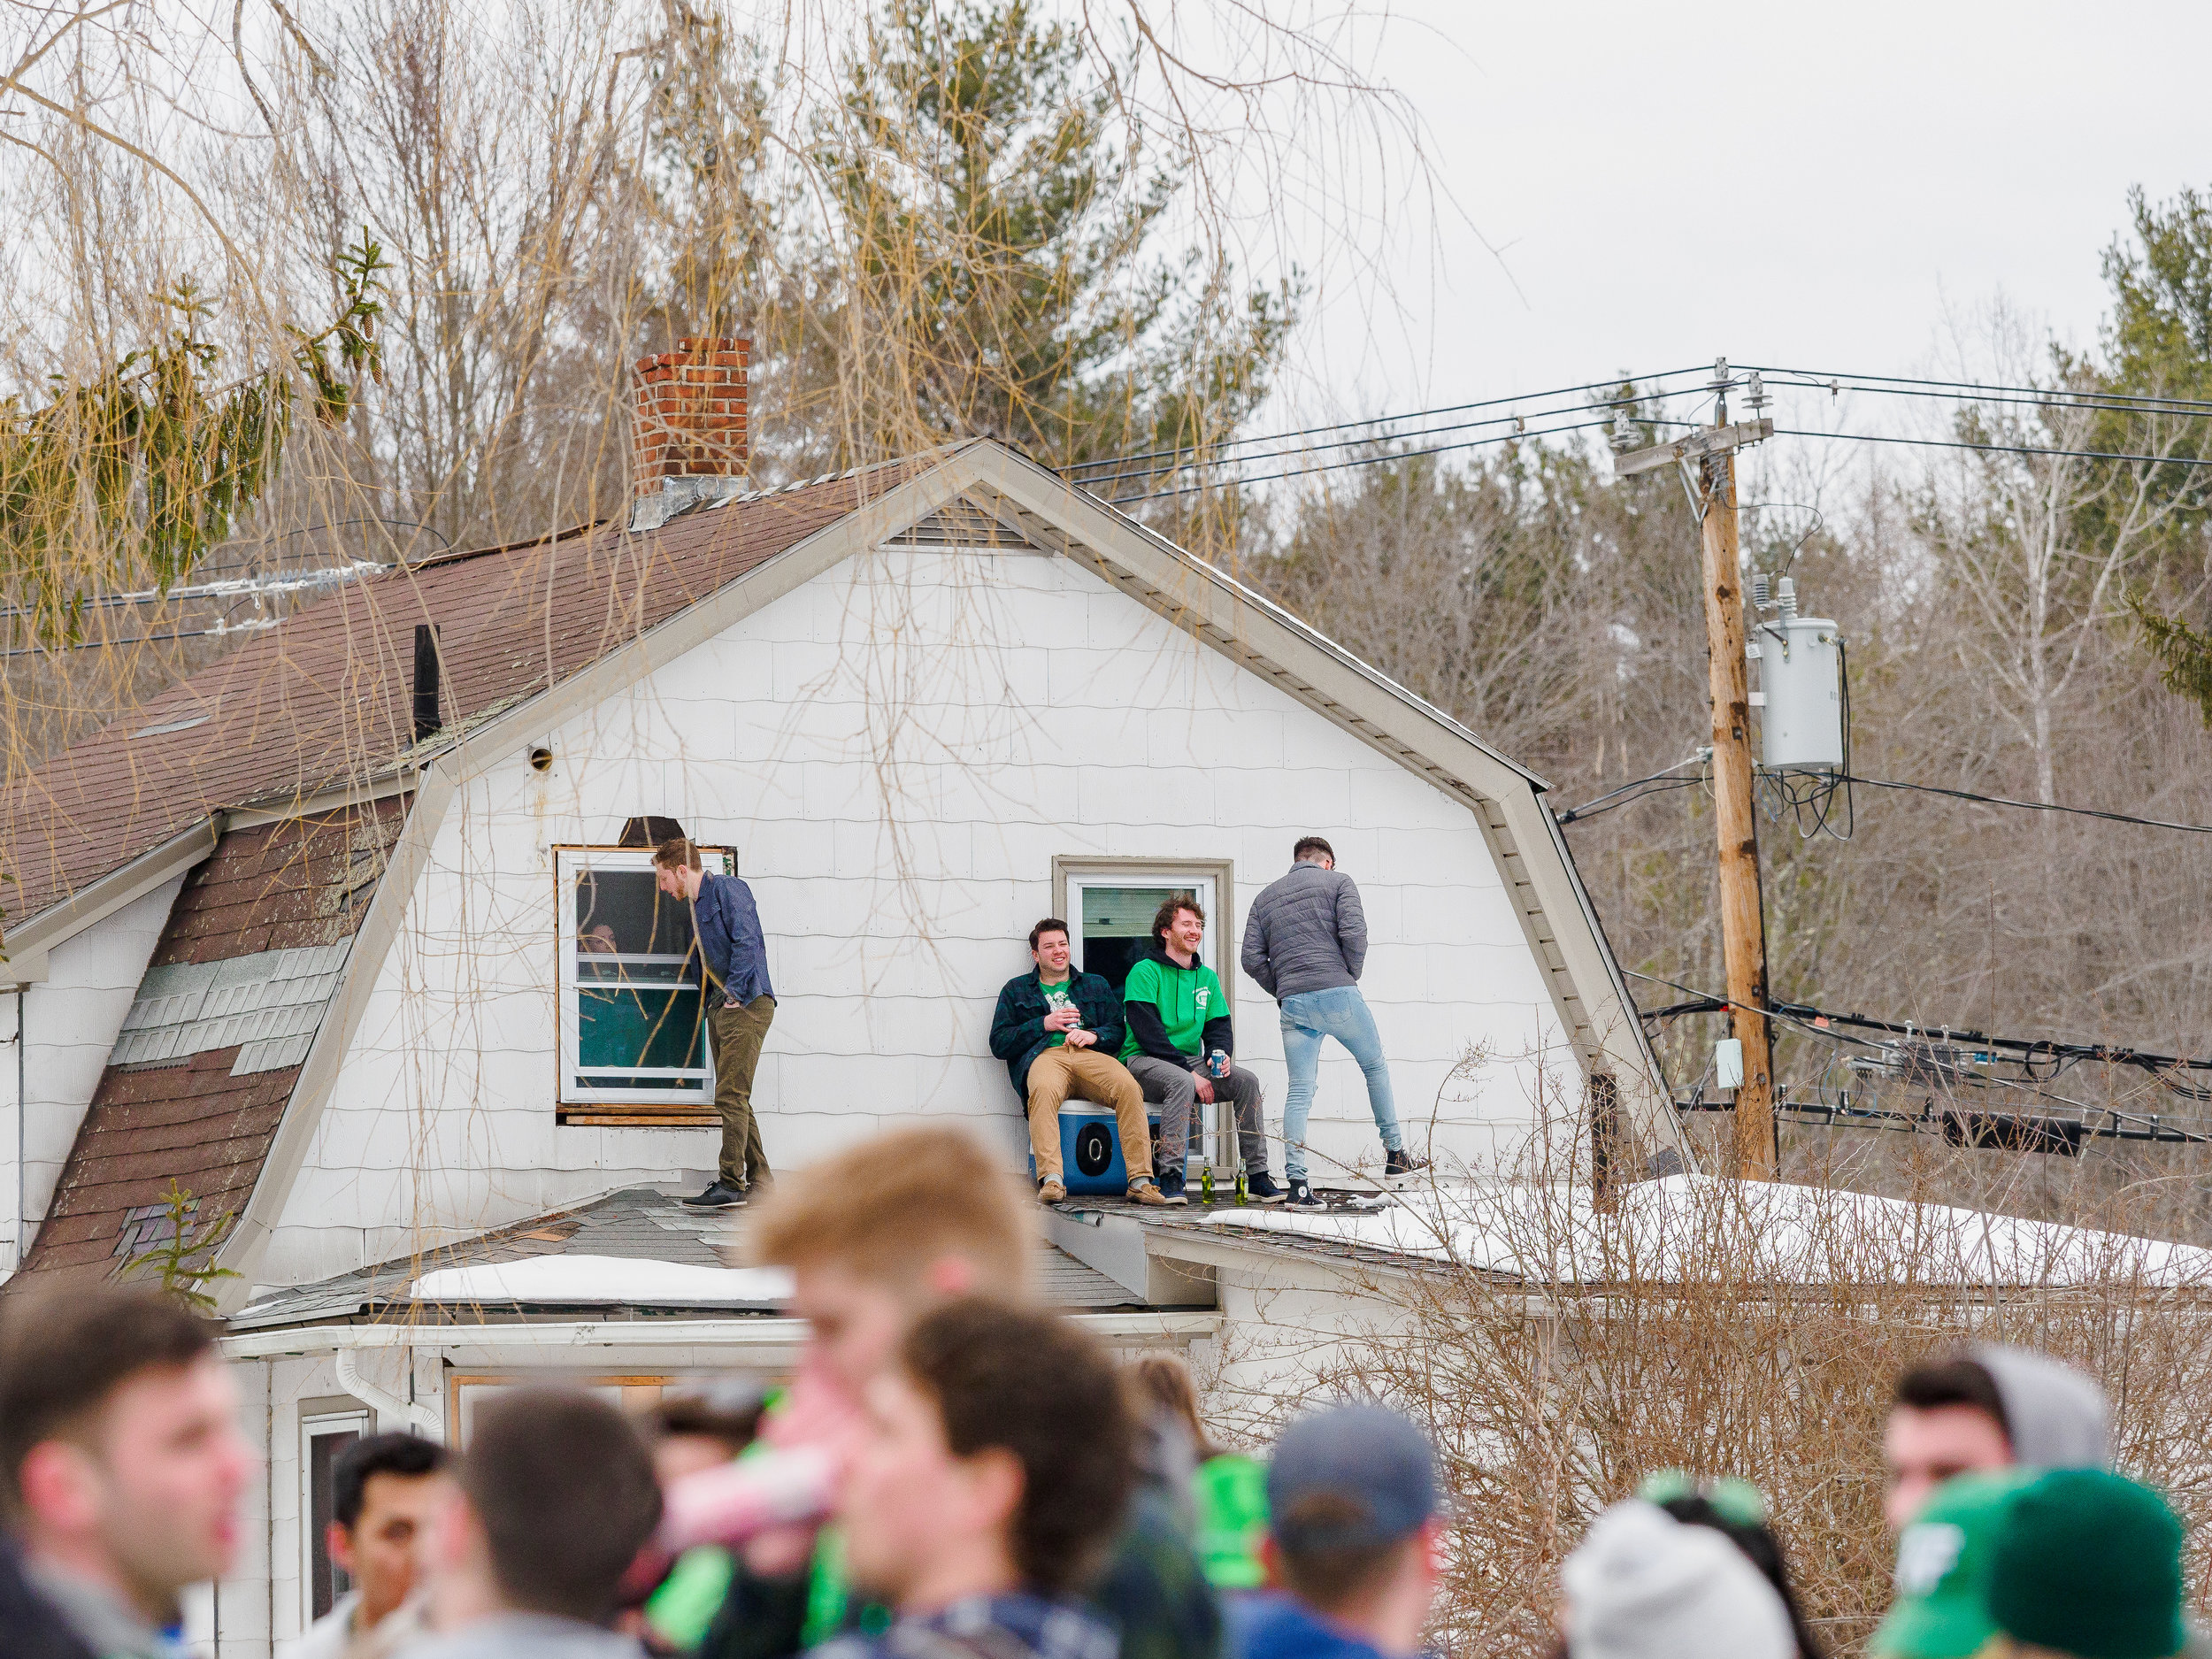  Party-goers watch from the roof of a house as large crowds gather outside in South Amherst during Blarney.  